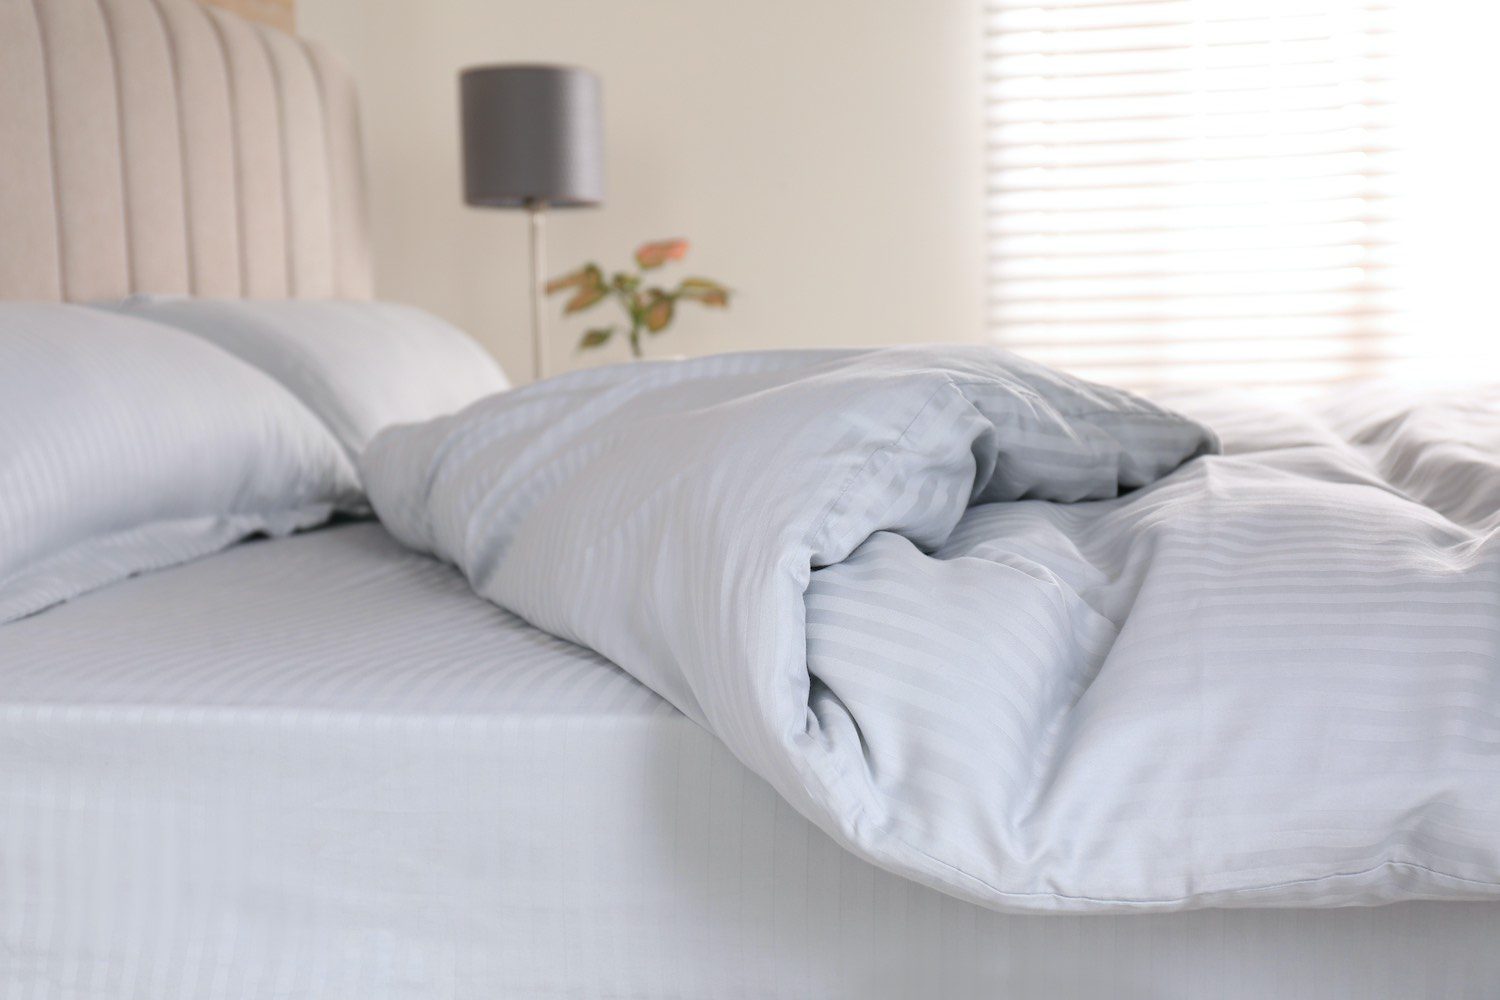 What Is A Duvet Cover Sleep Foundation, How To Fill A Duvet